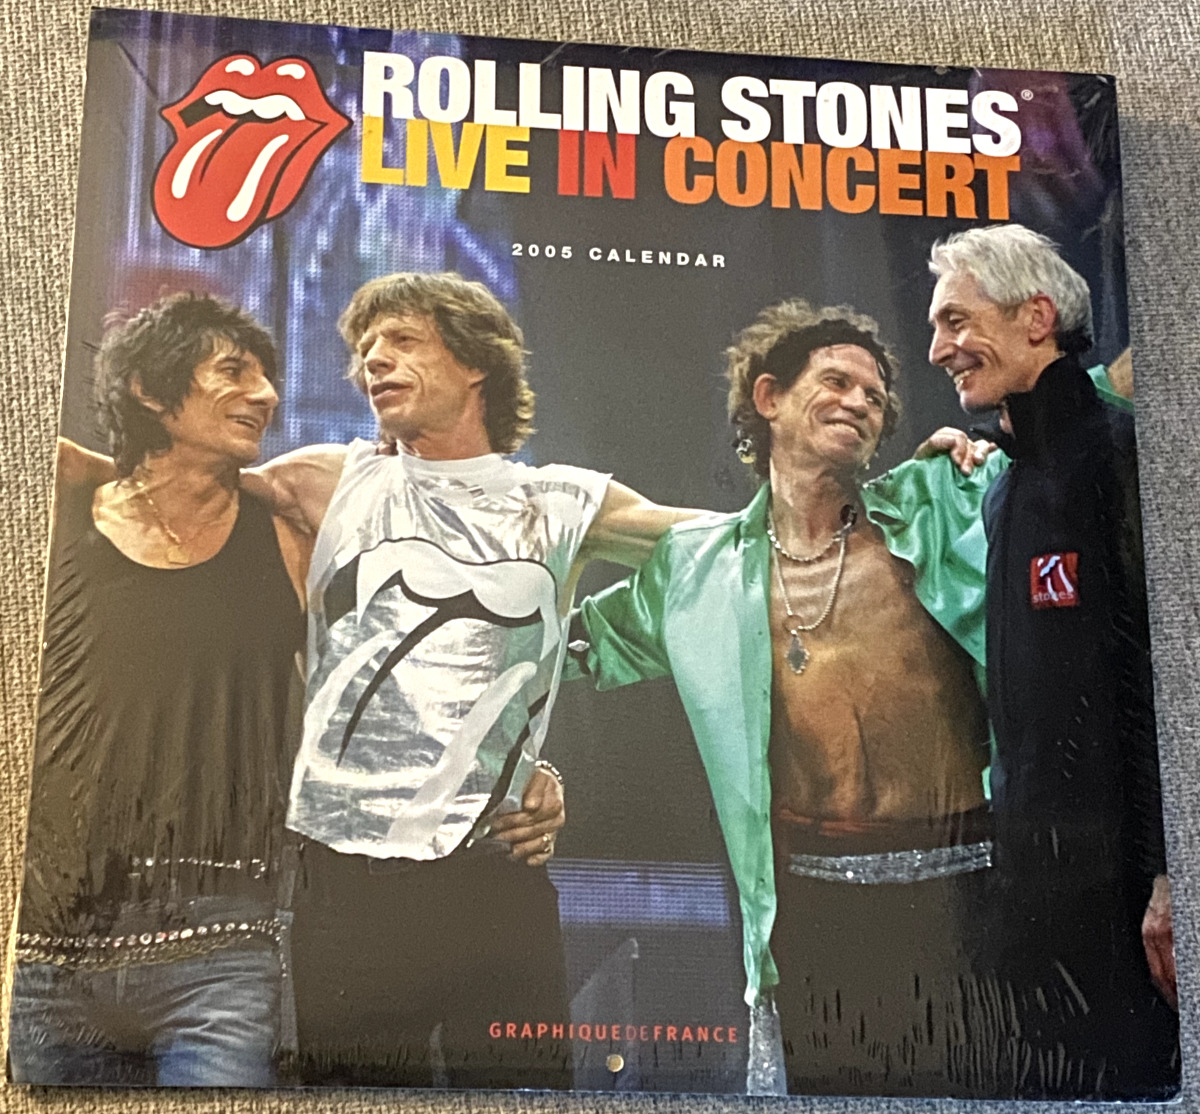 THE ROLLING STONES Live In Concert 2005 Calendar Brand New Sealed